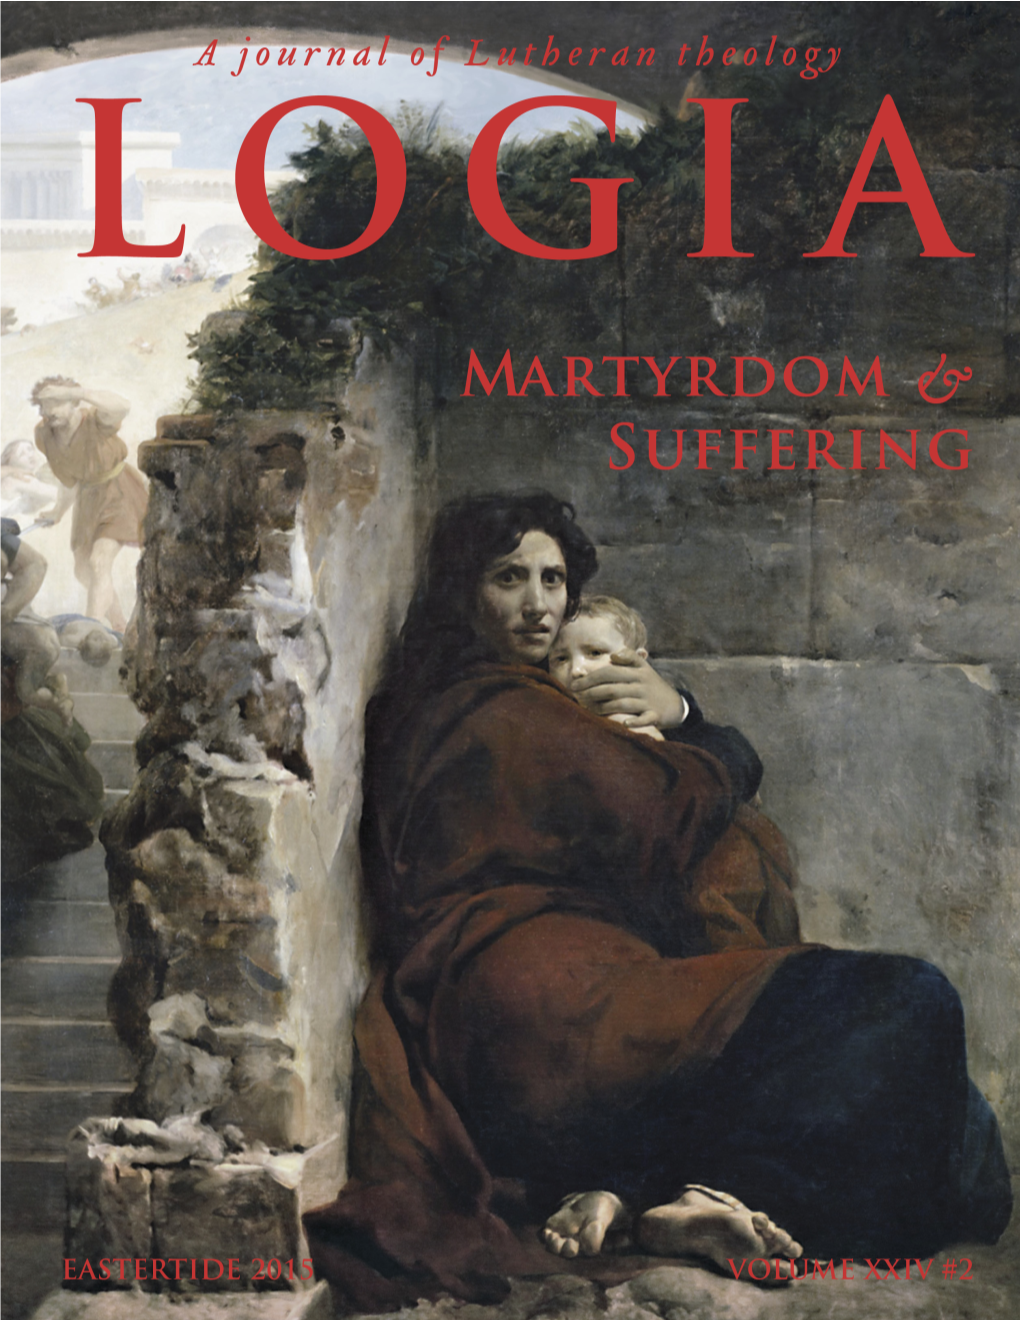 LOGIA Is a Journal of Lutheran Theology